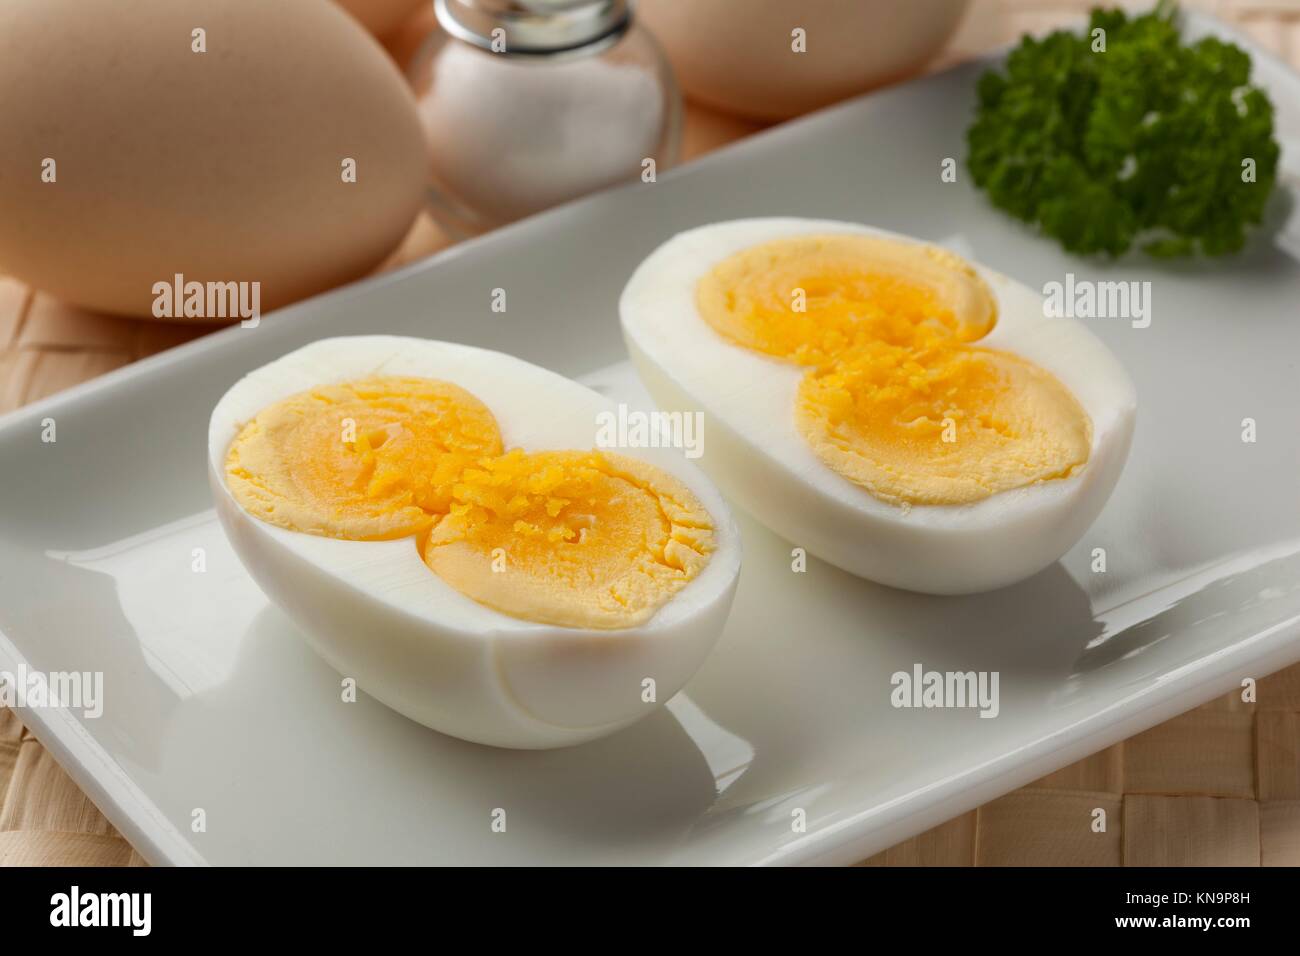 Cooked double yolk egg on a dish. Stock Photo